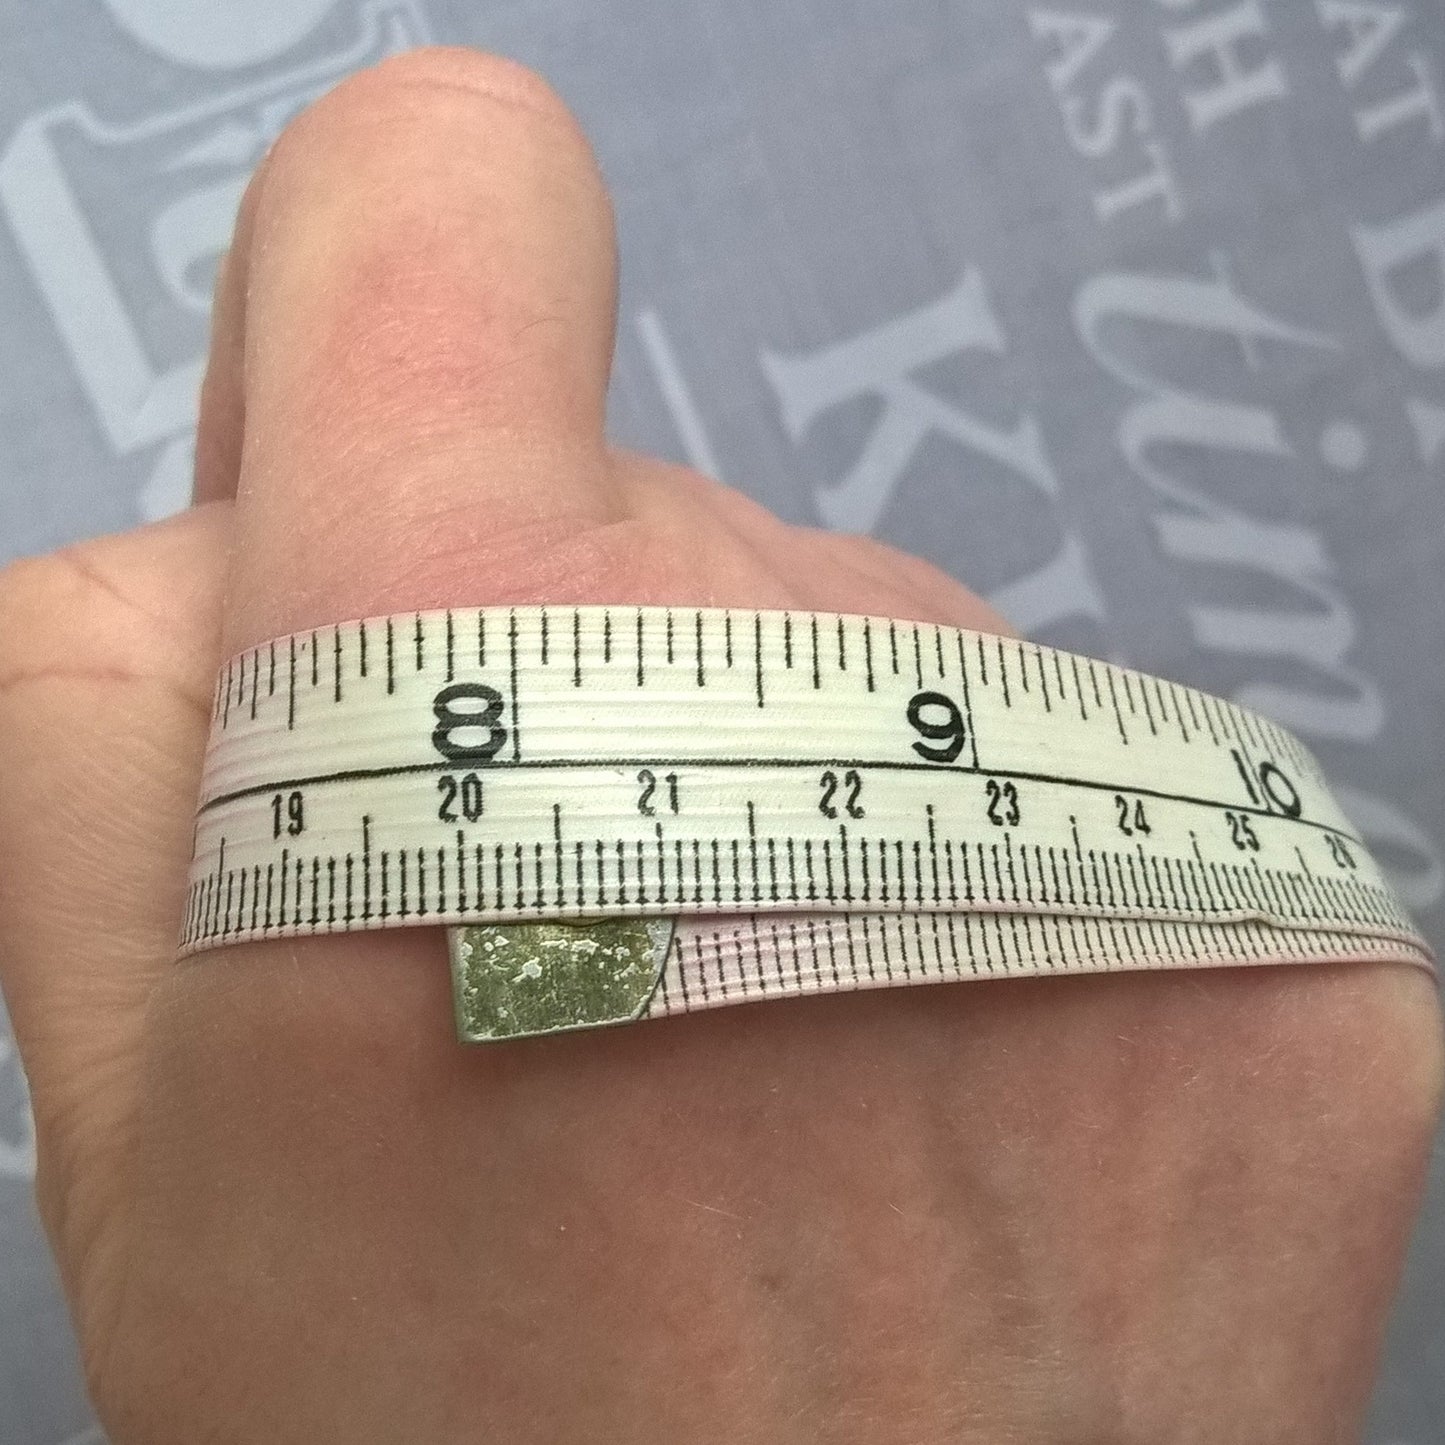 Measuring hand for size required. 